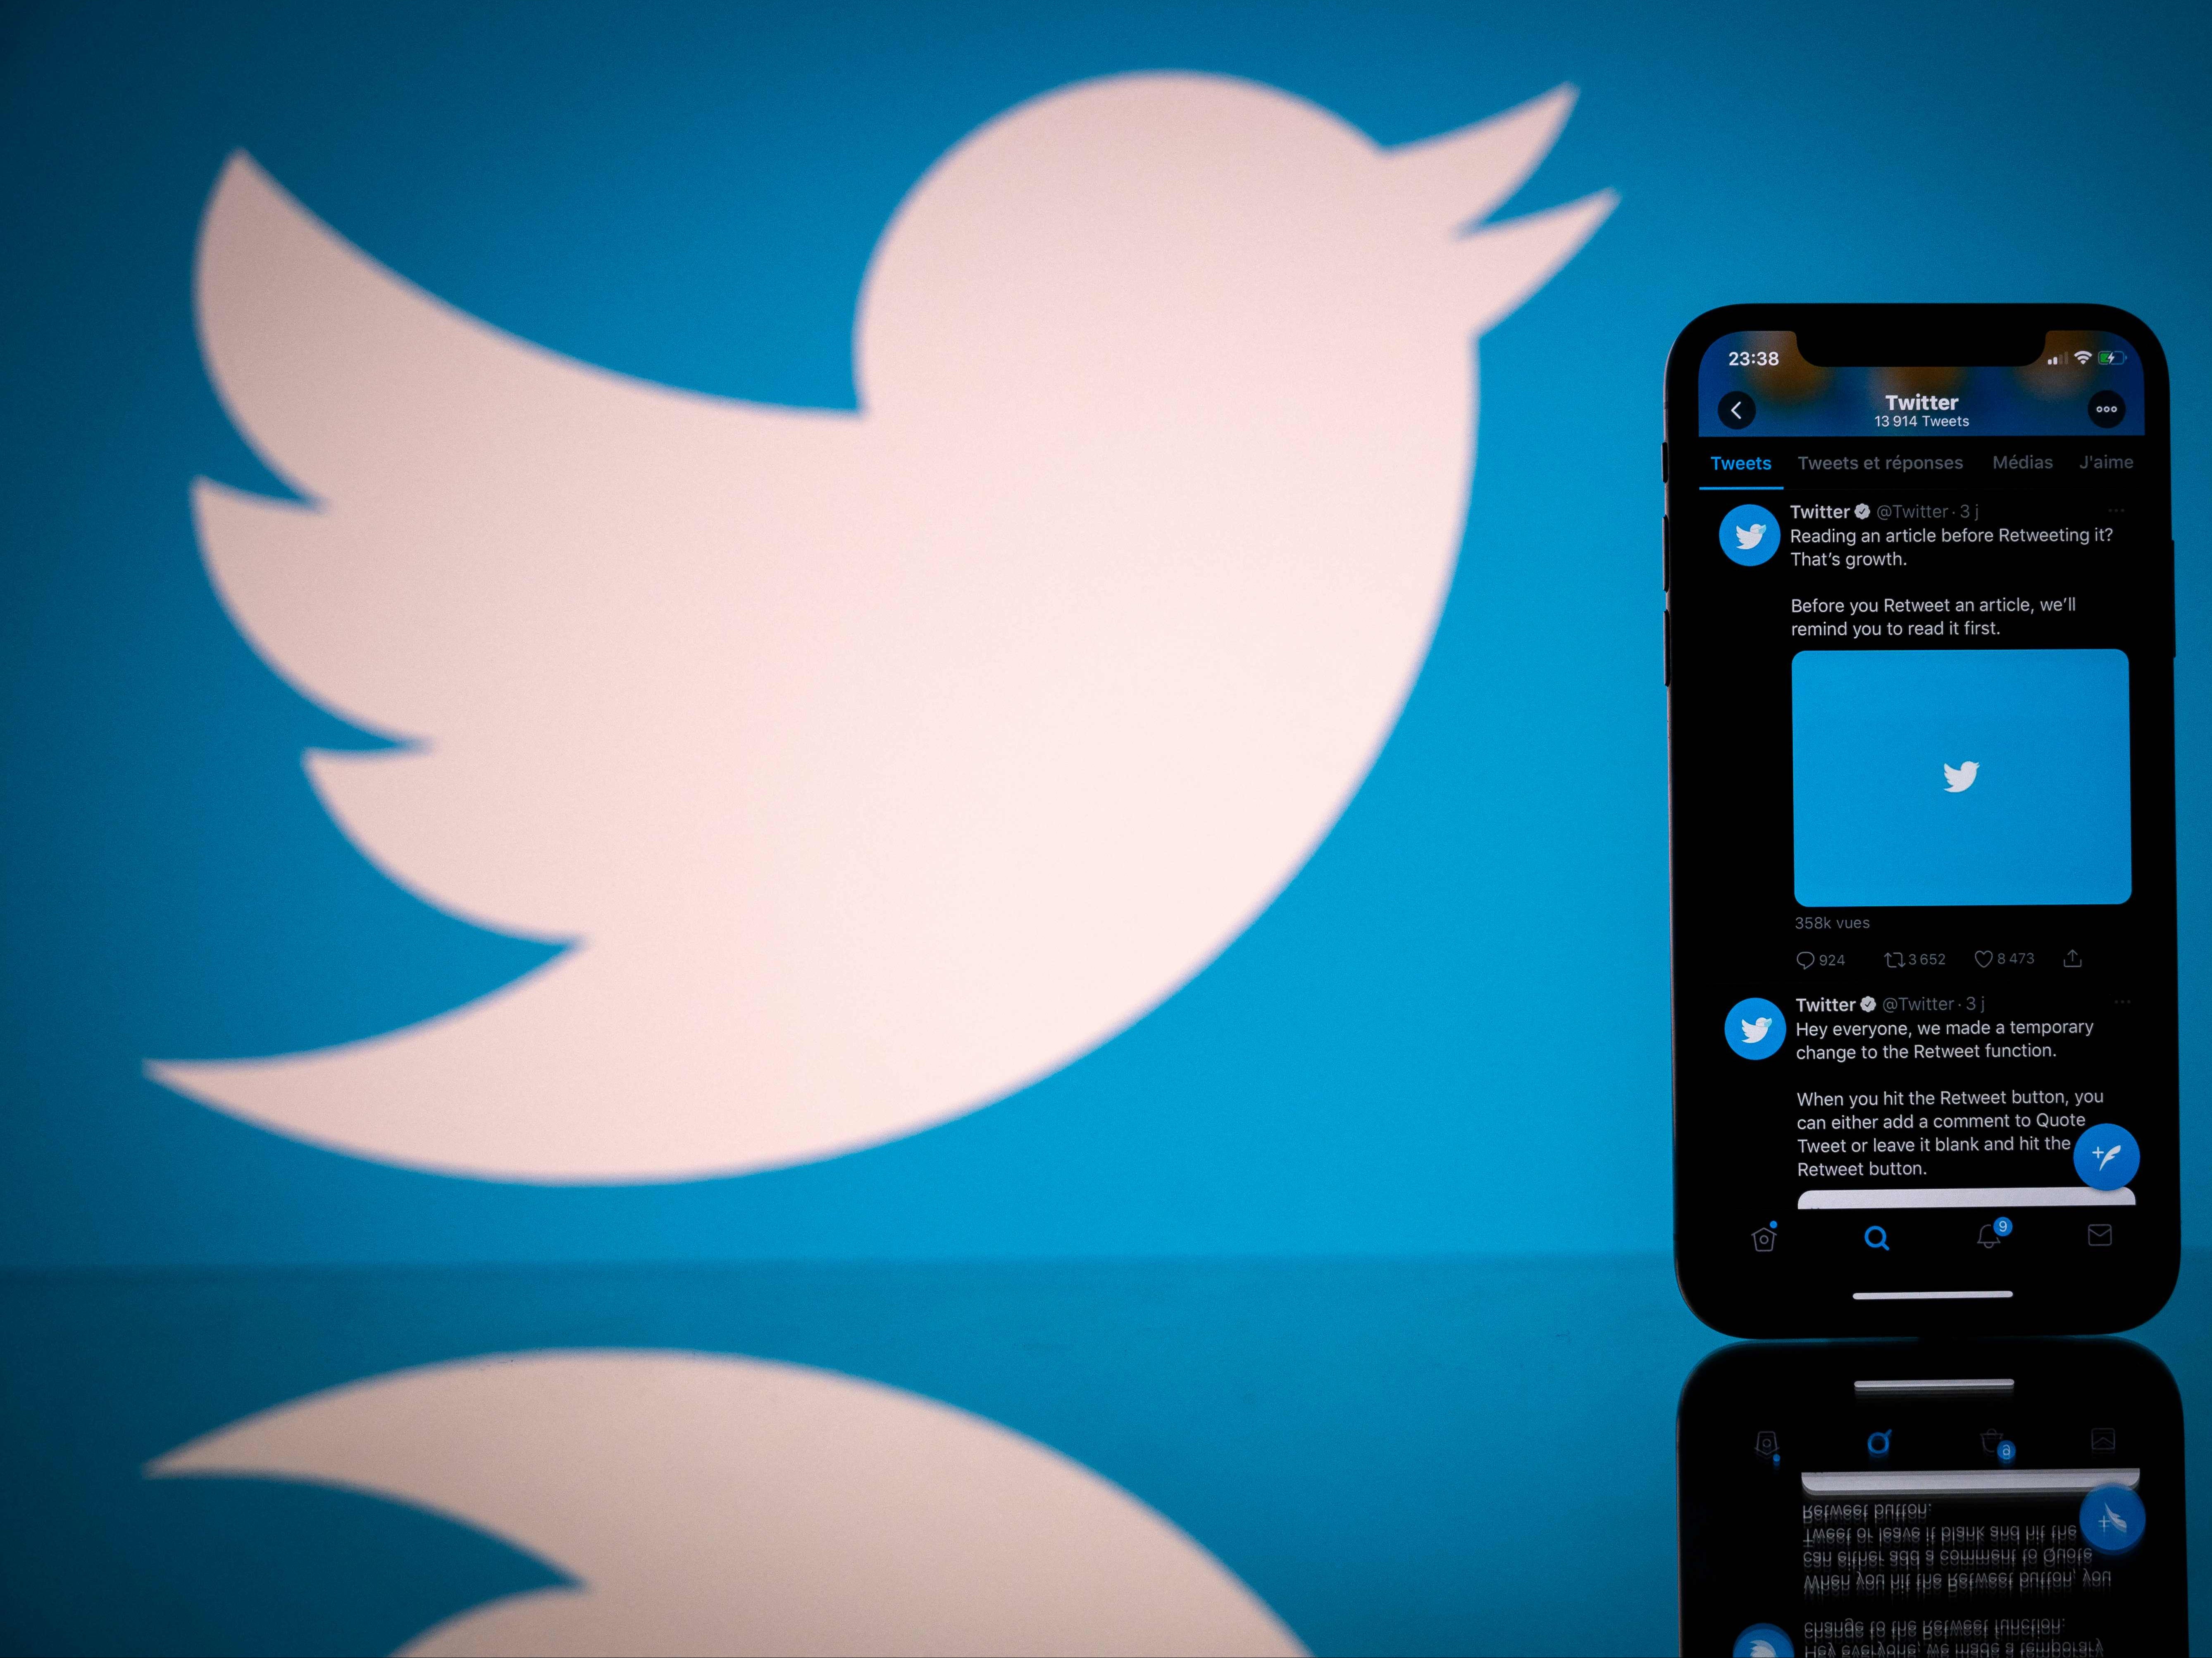 The Twitter outage follows an hours-long outage in the early hours of Saturday morning